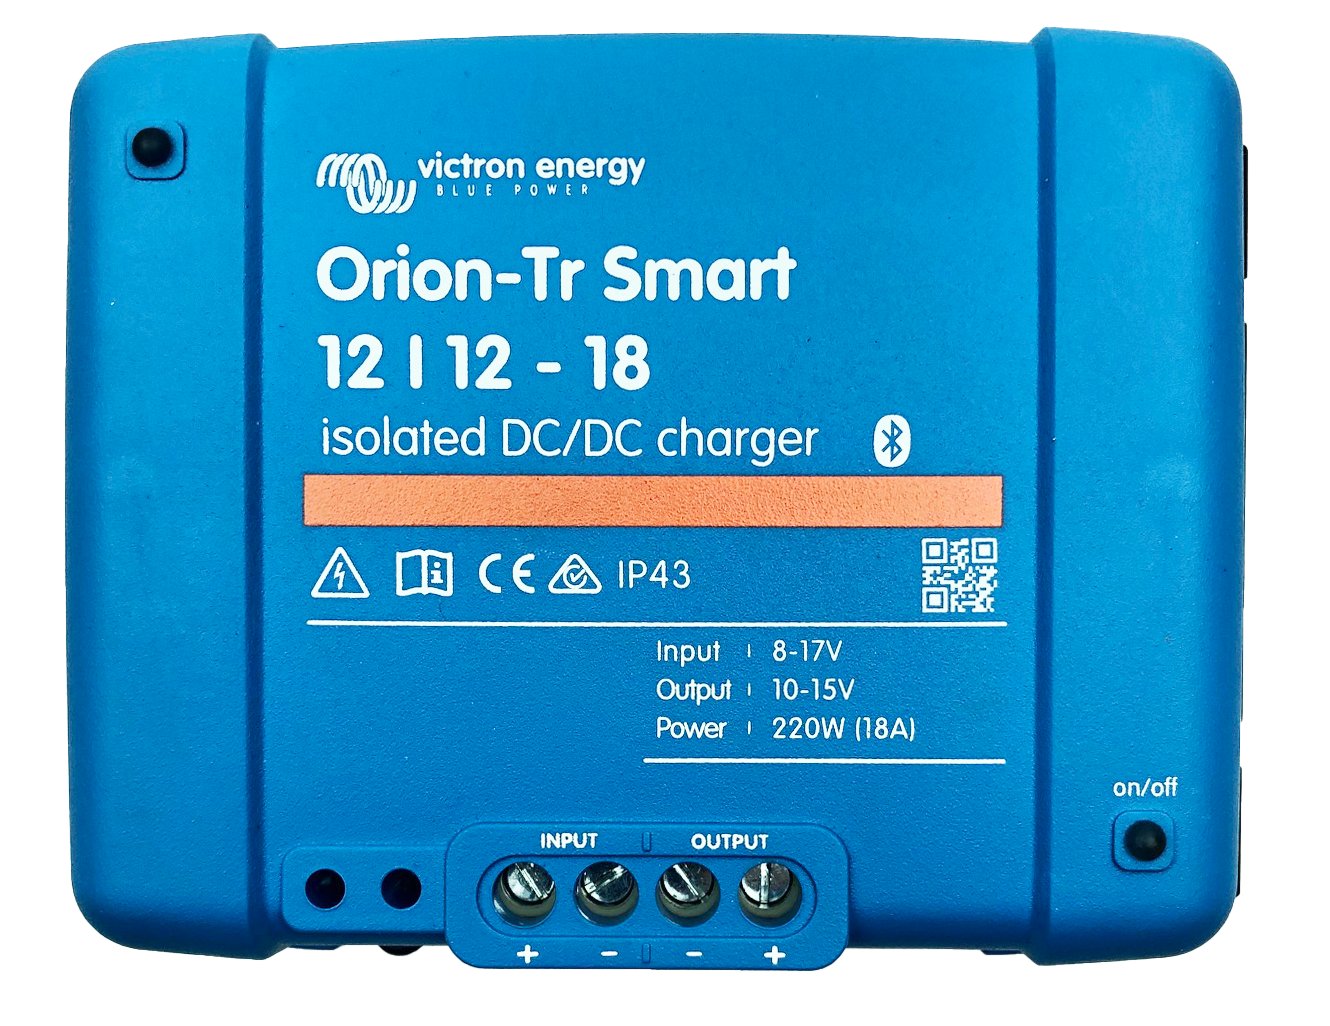 Should the ORI121222120 DC DC battery charger be mounted closer to the source or to the load?